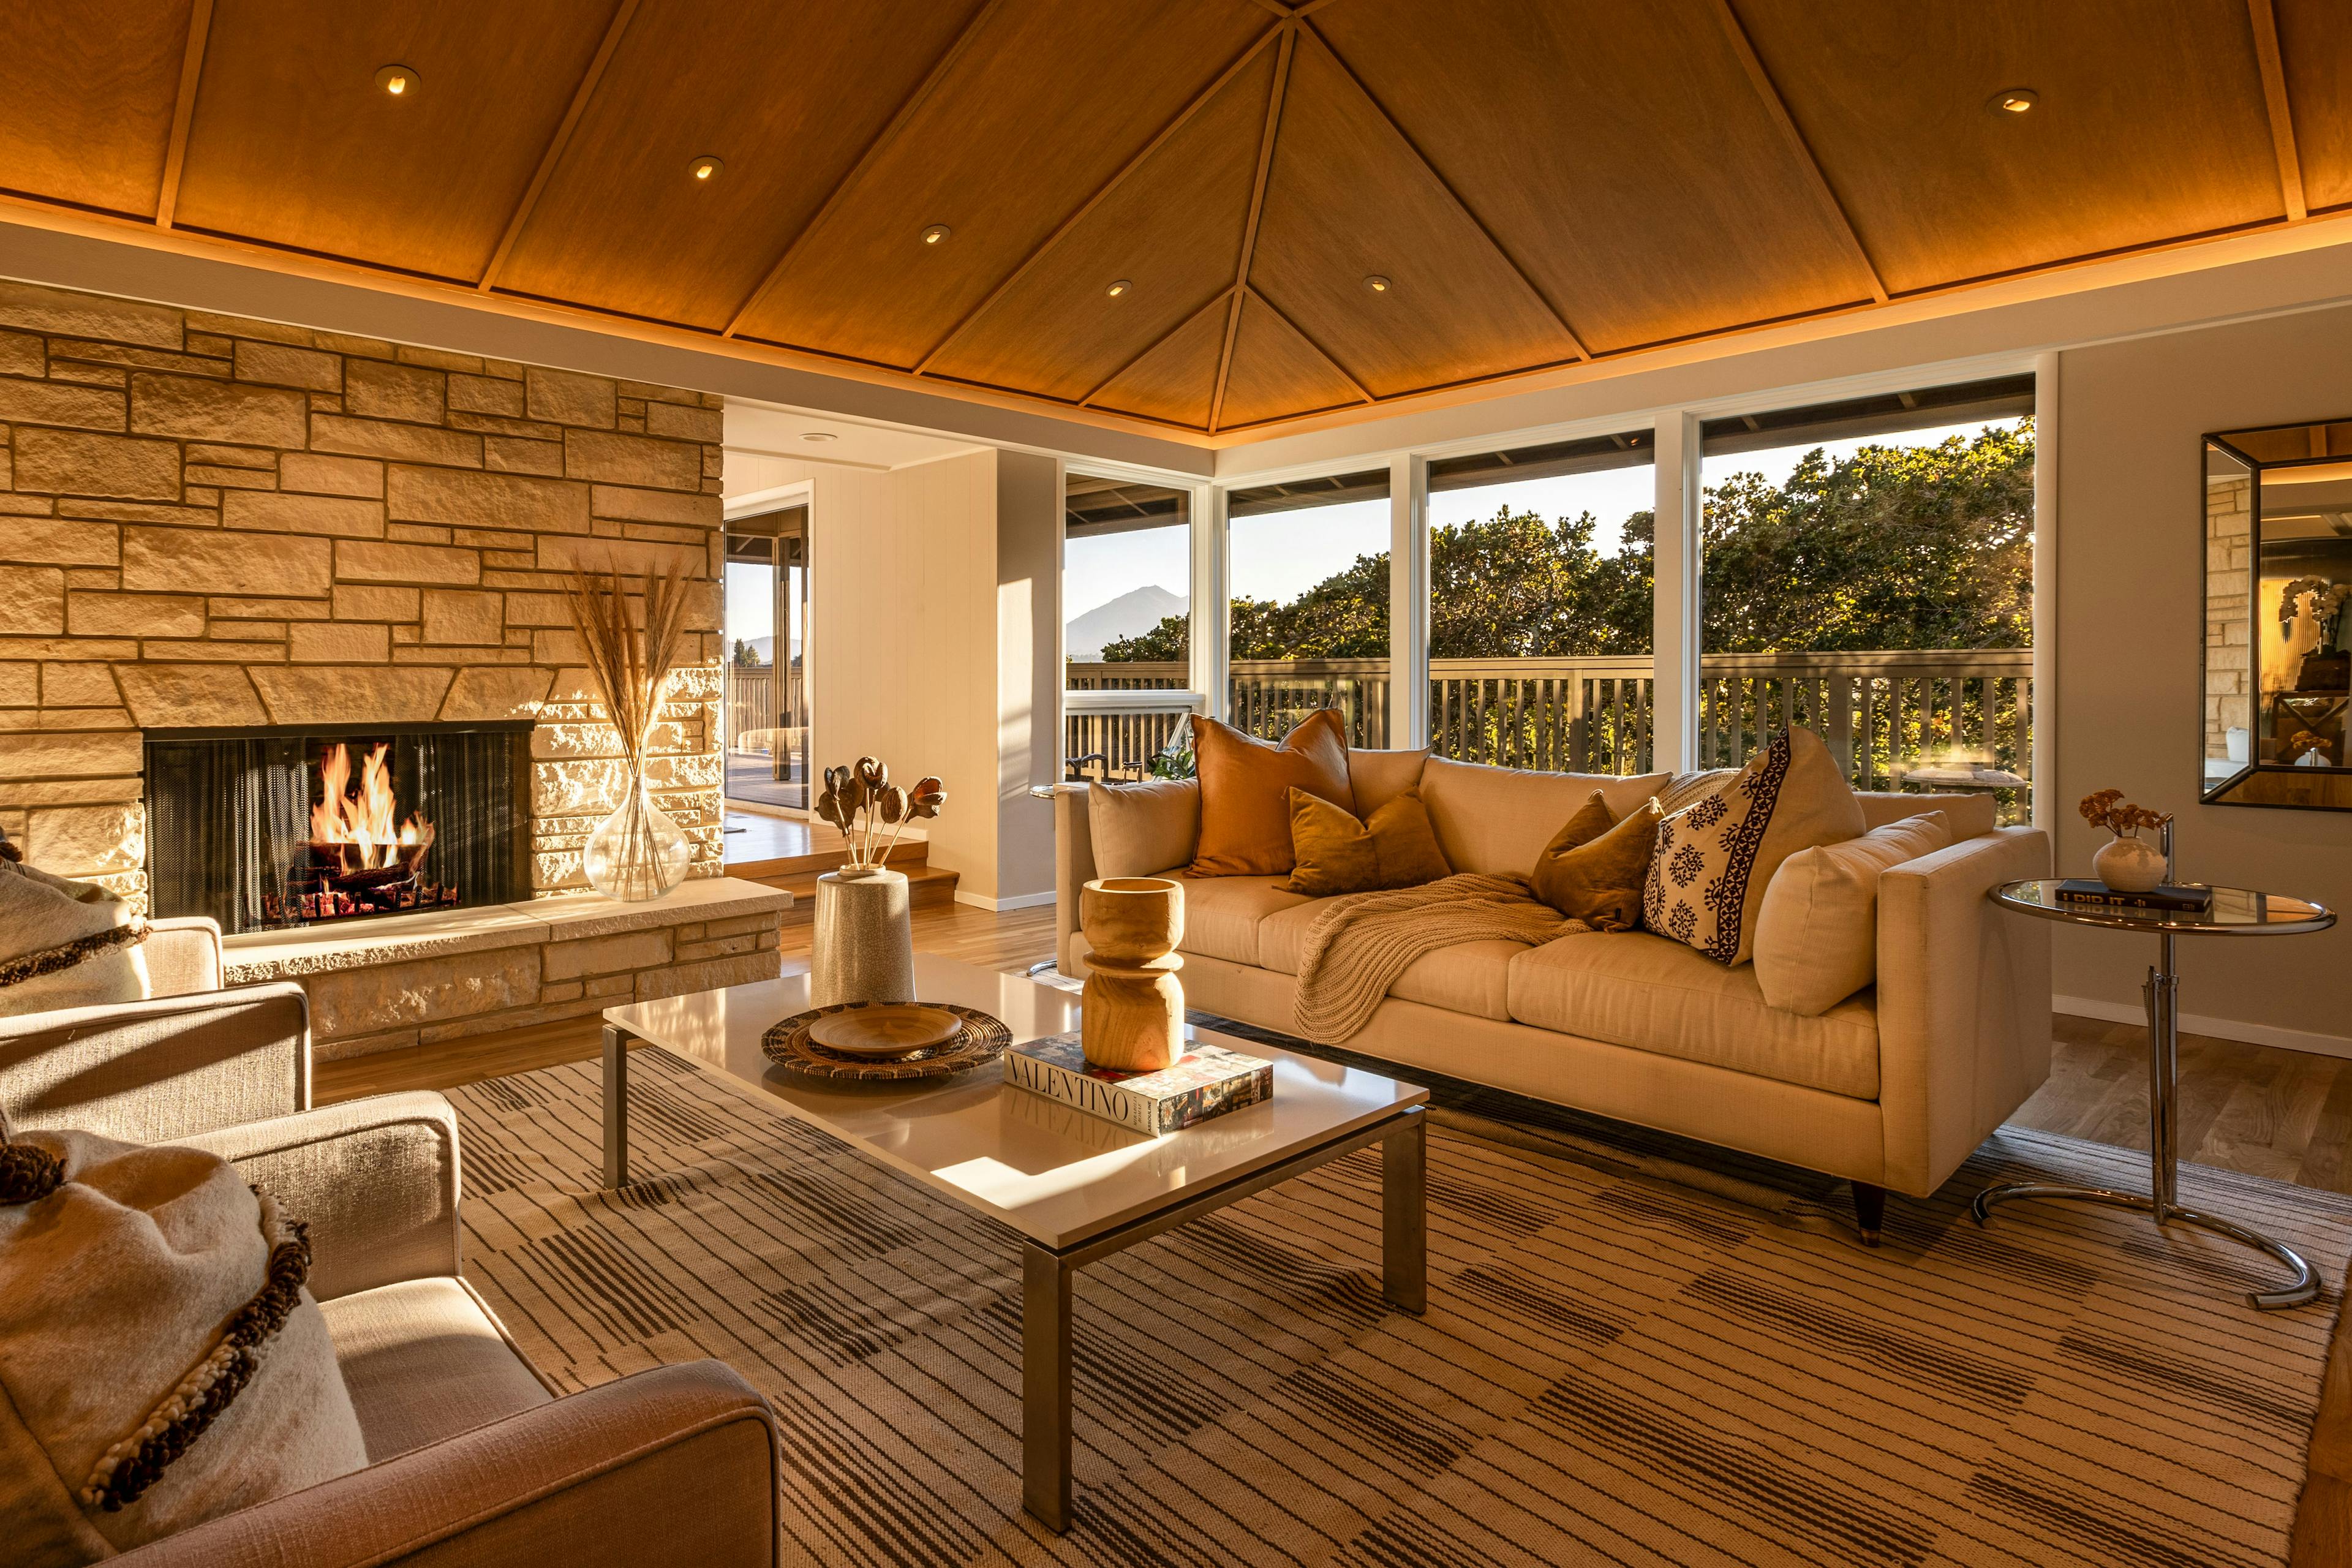 Gorgeous Bay Area views—inside and out!